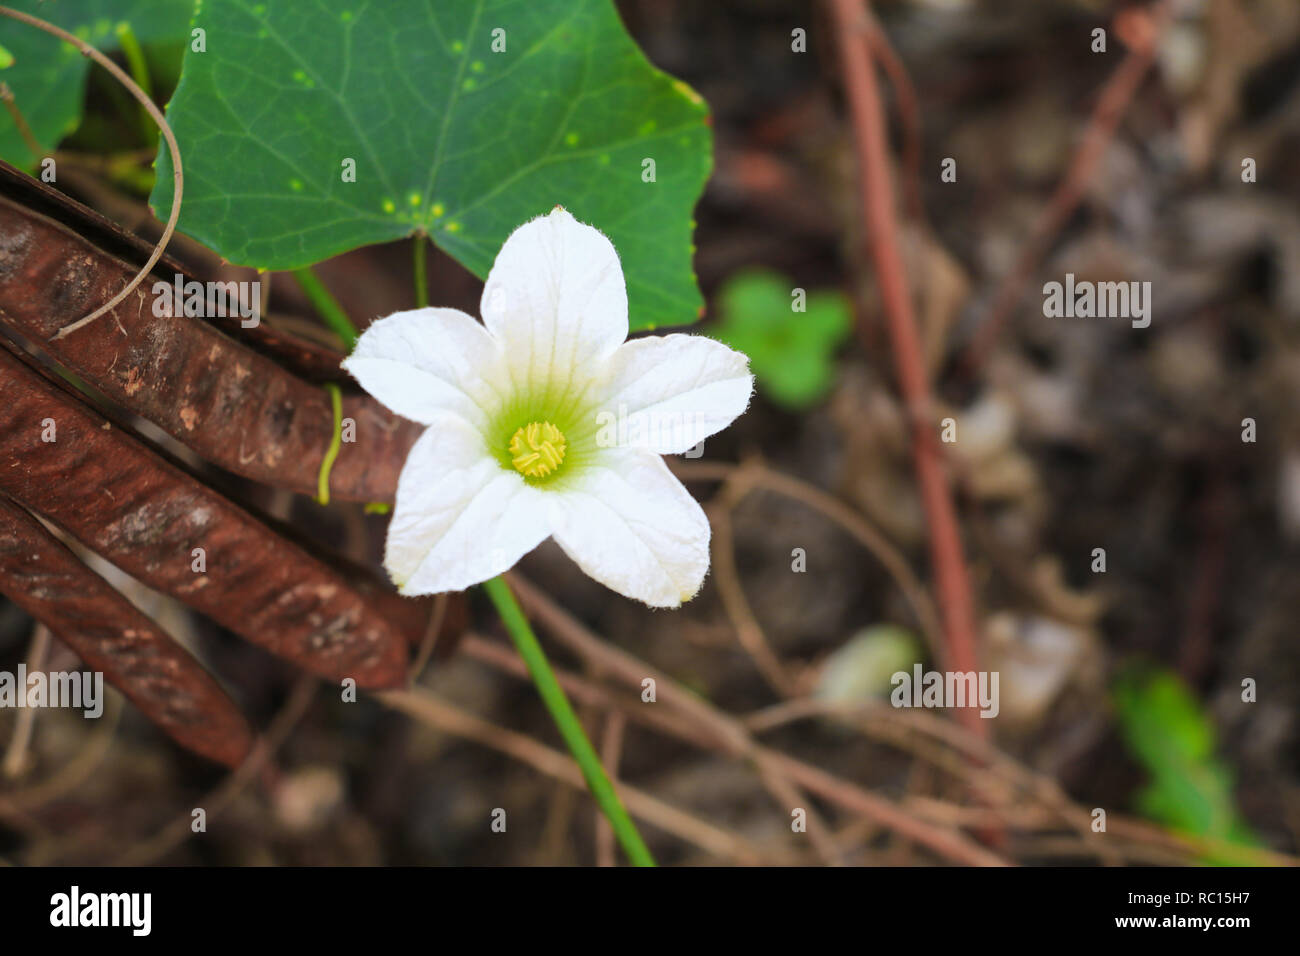 flower ivy gourd white and leaf green ( coccinia grandis ) Stock Photo